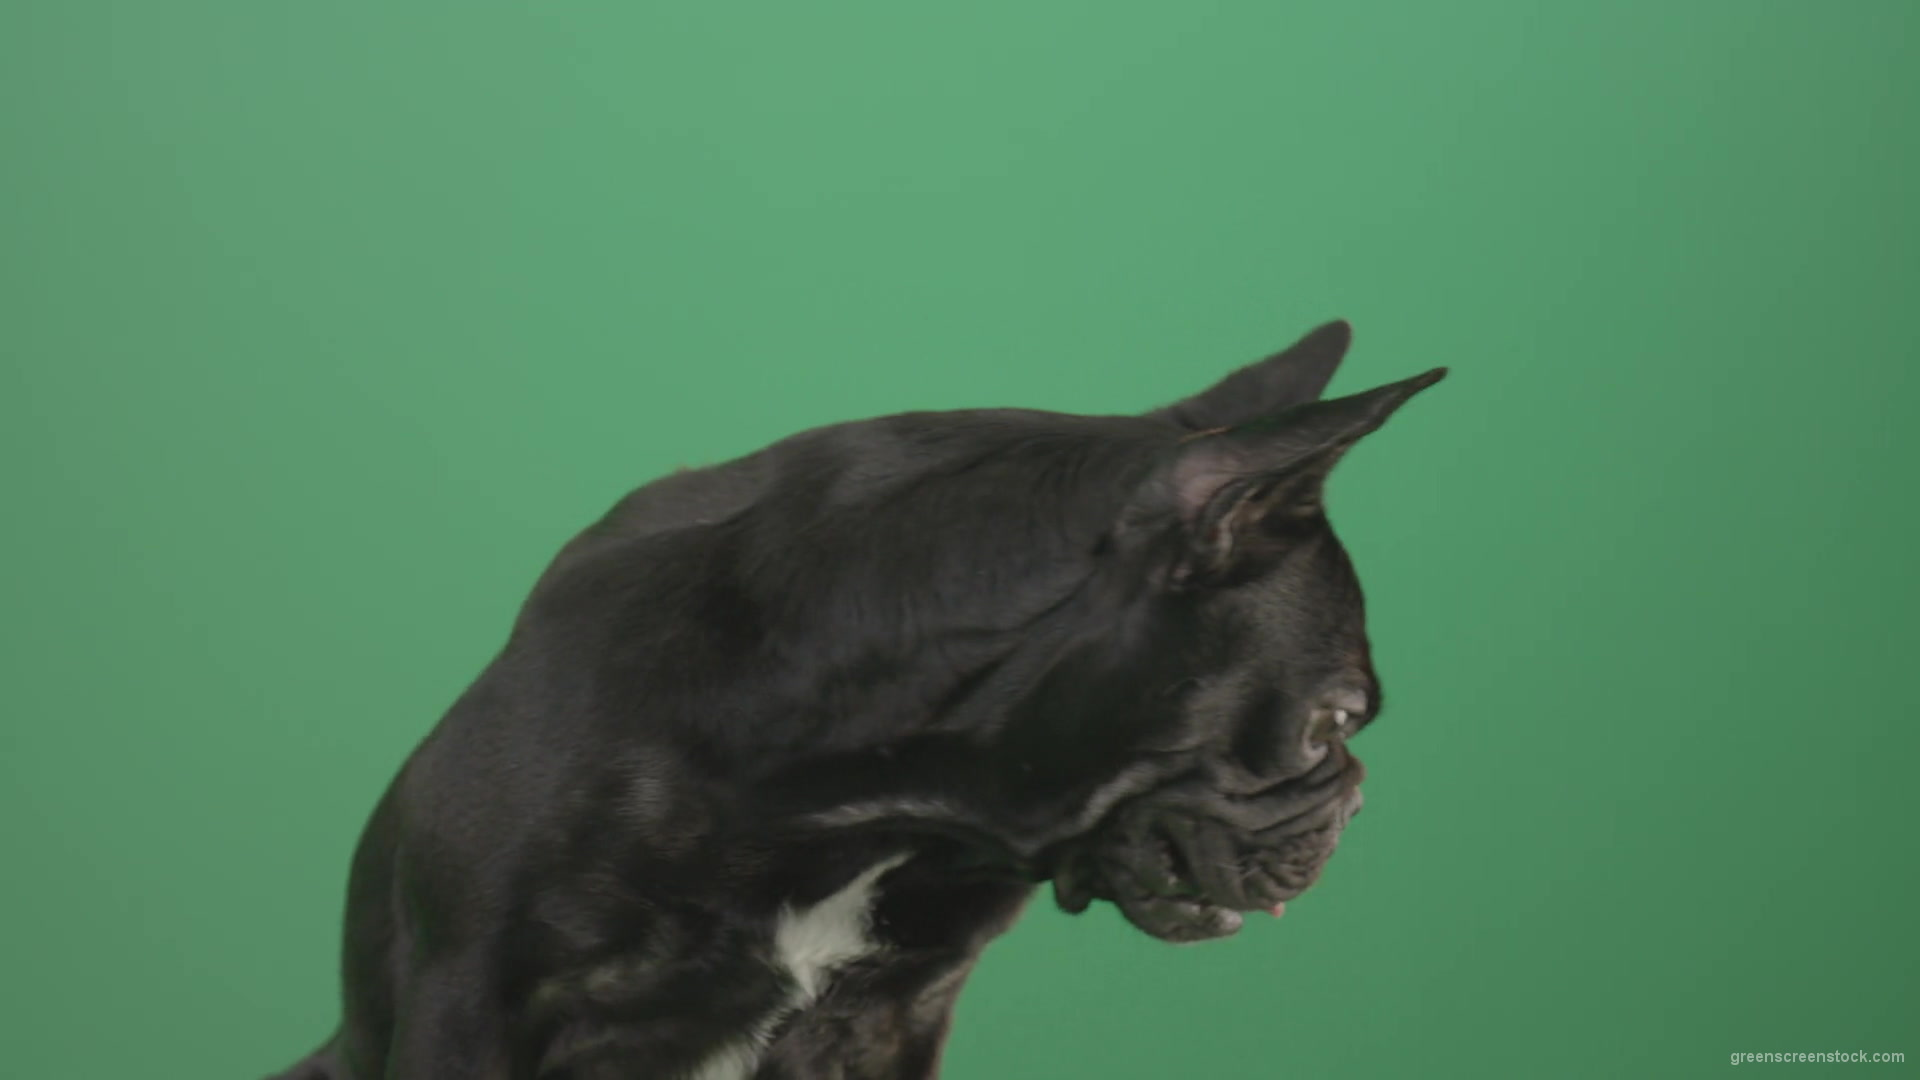 Face-portrait-of-scared-french-bulldog-toy-dog-isolated-on-green-screen-1920_005 Green Screen Stock